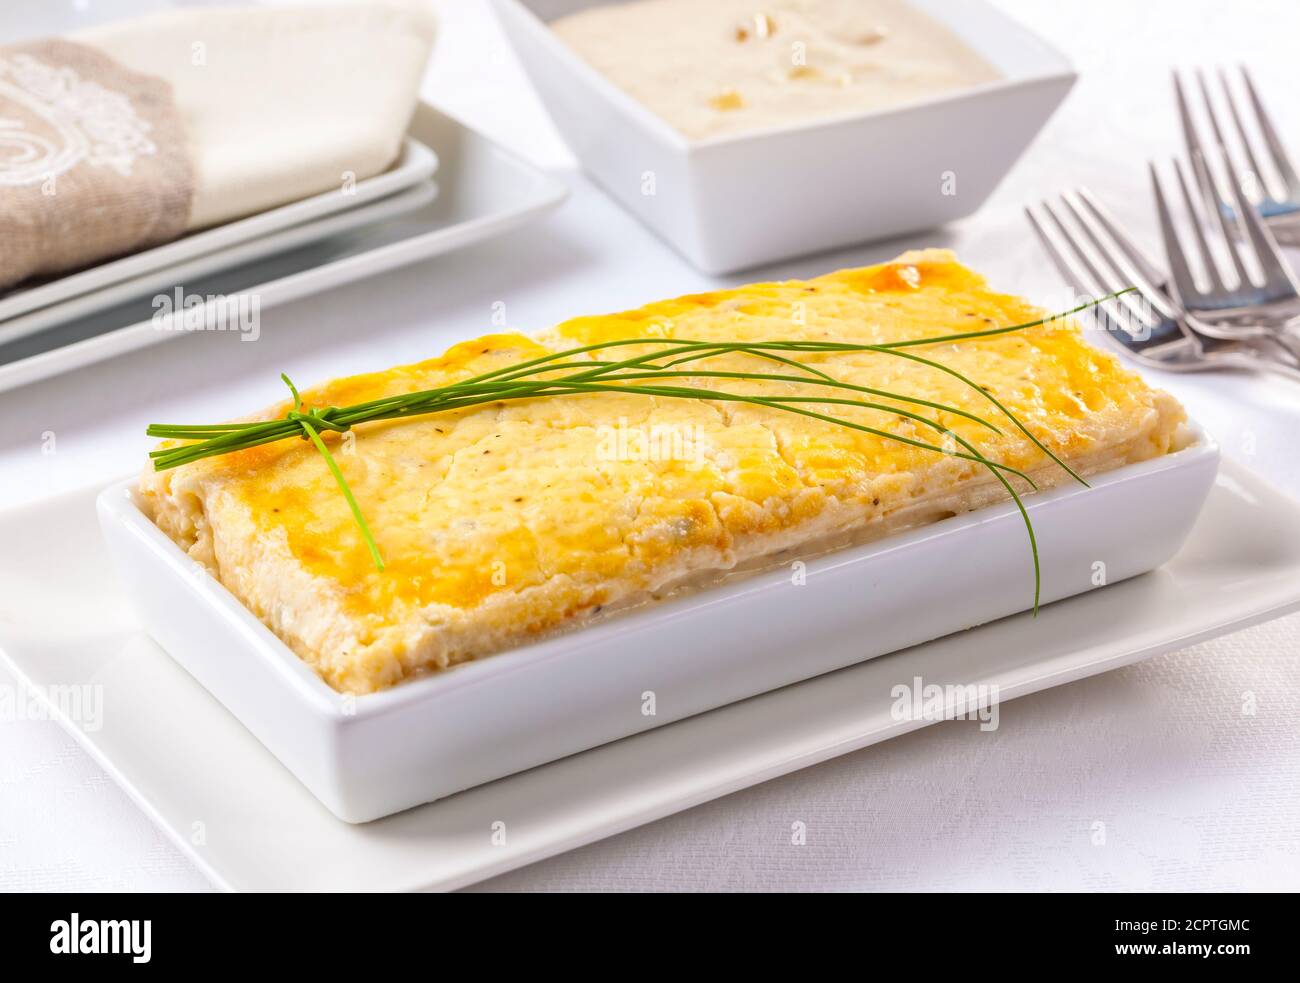 Cheese loaf made with different types of cheese. Stock Photo